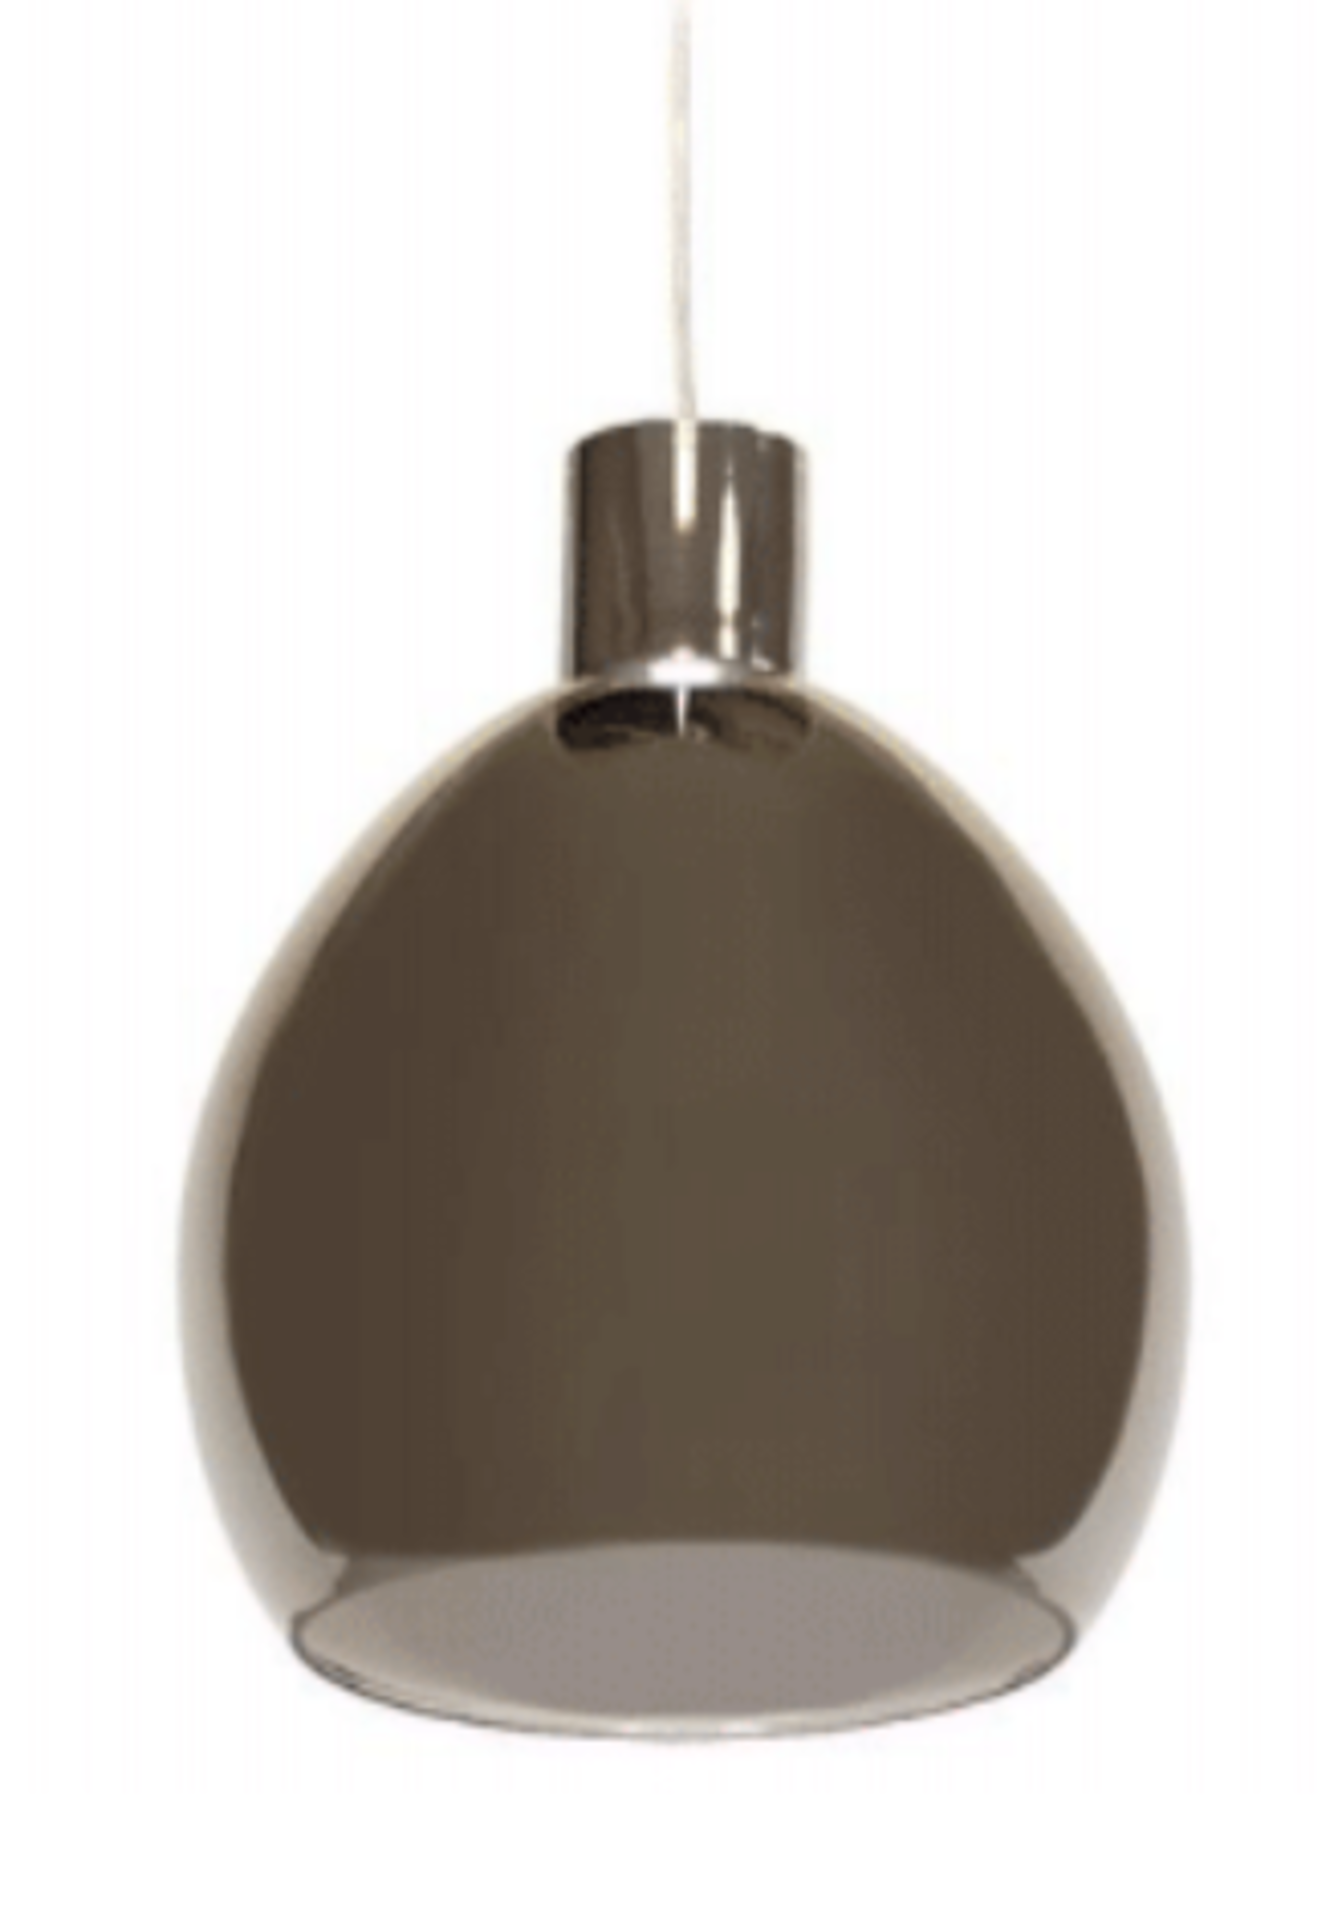 5 X BRAND NEW GRECO 250MM CEILING PENDANT LIGHTS RRP £96 EACH - Image 2 of 2